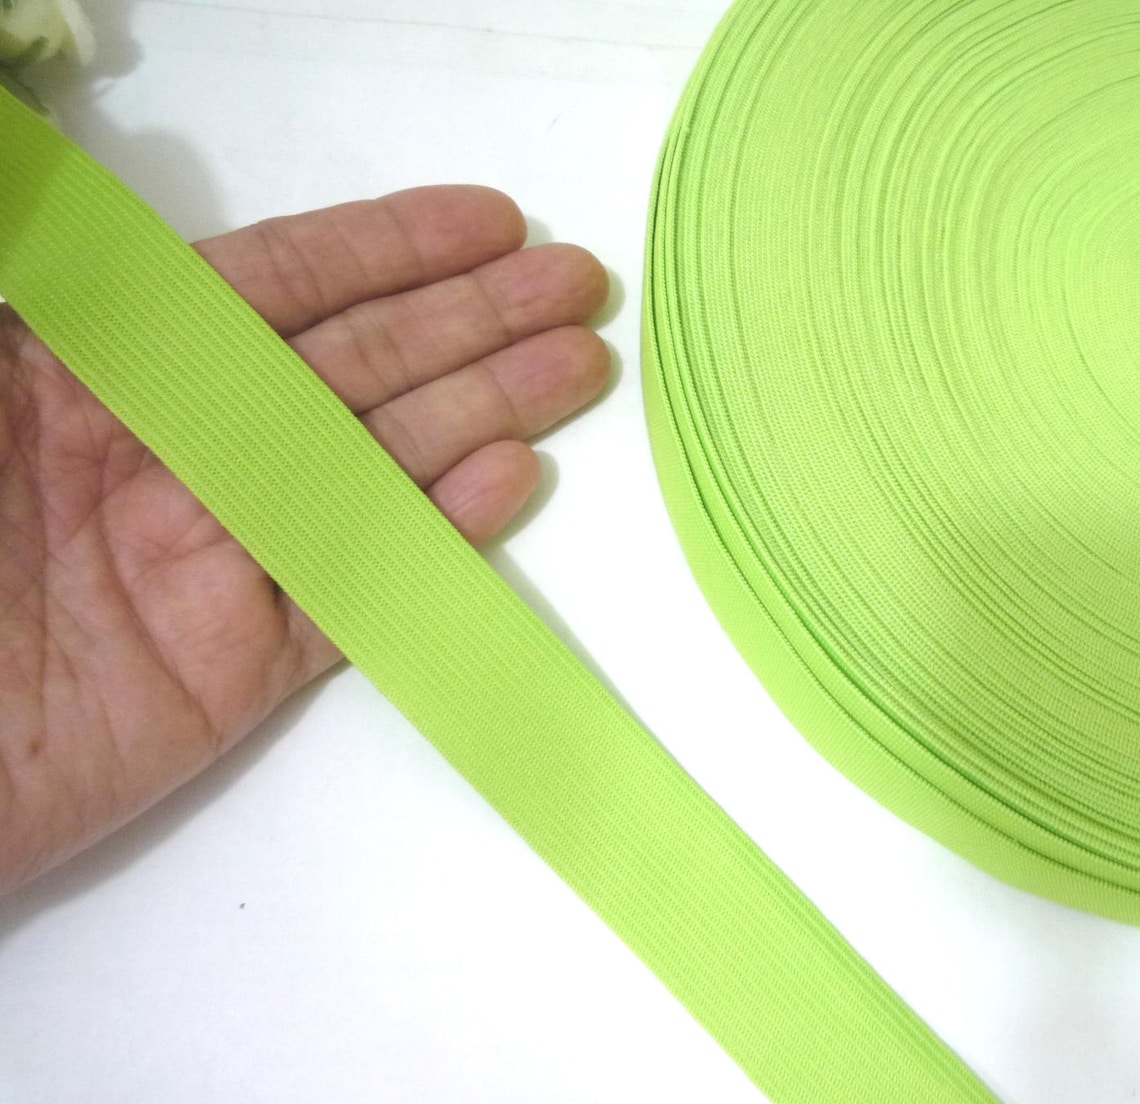  1  inch 2 5 cm  wide  3 yds 10 yds Yellowish Green Vintage Etsy